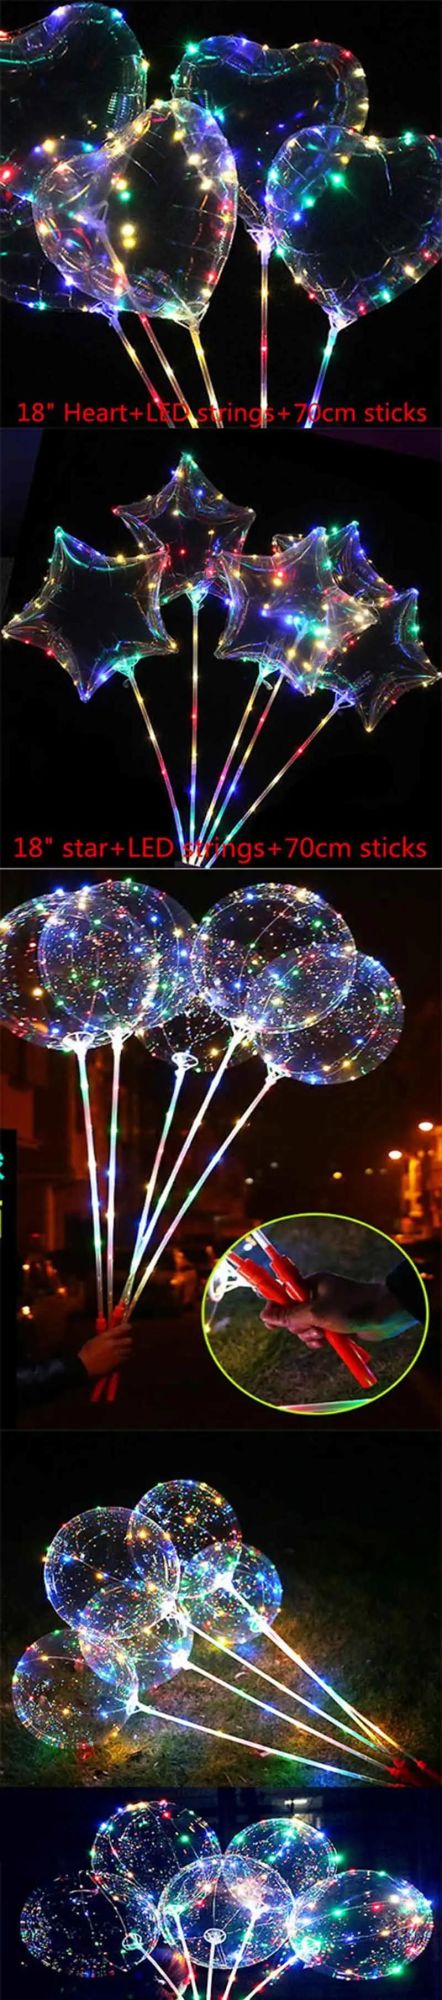 Transparent Clear Party Eco-Friendly Bobo Balloon 20 Inches LED Balloon